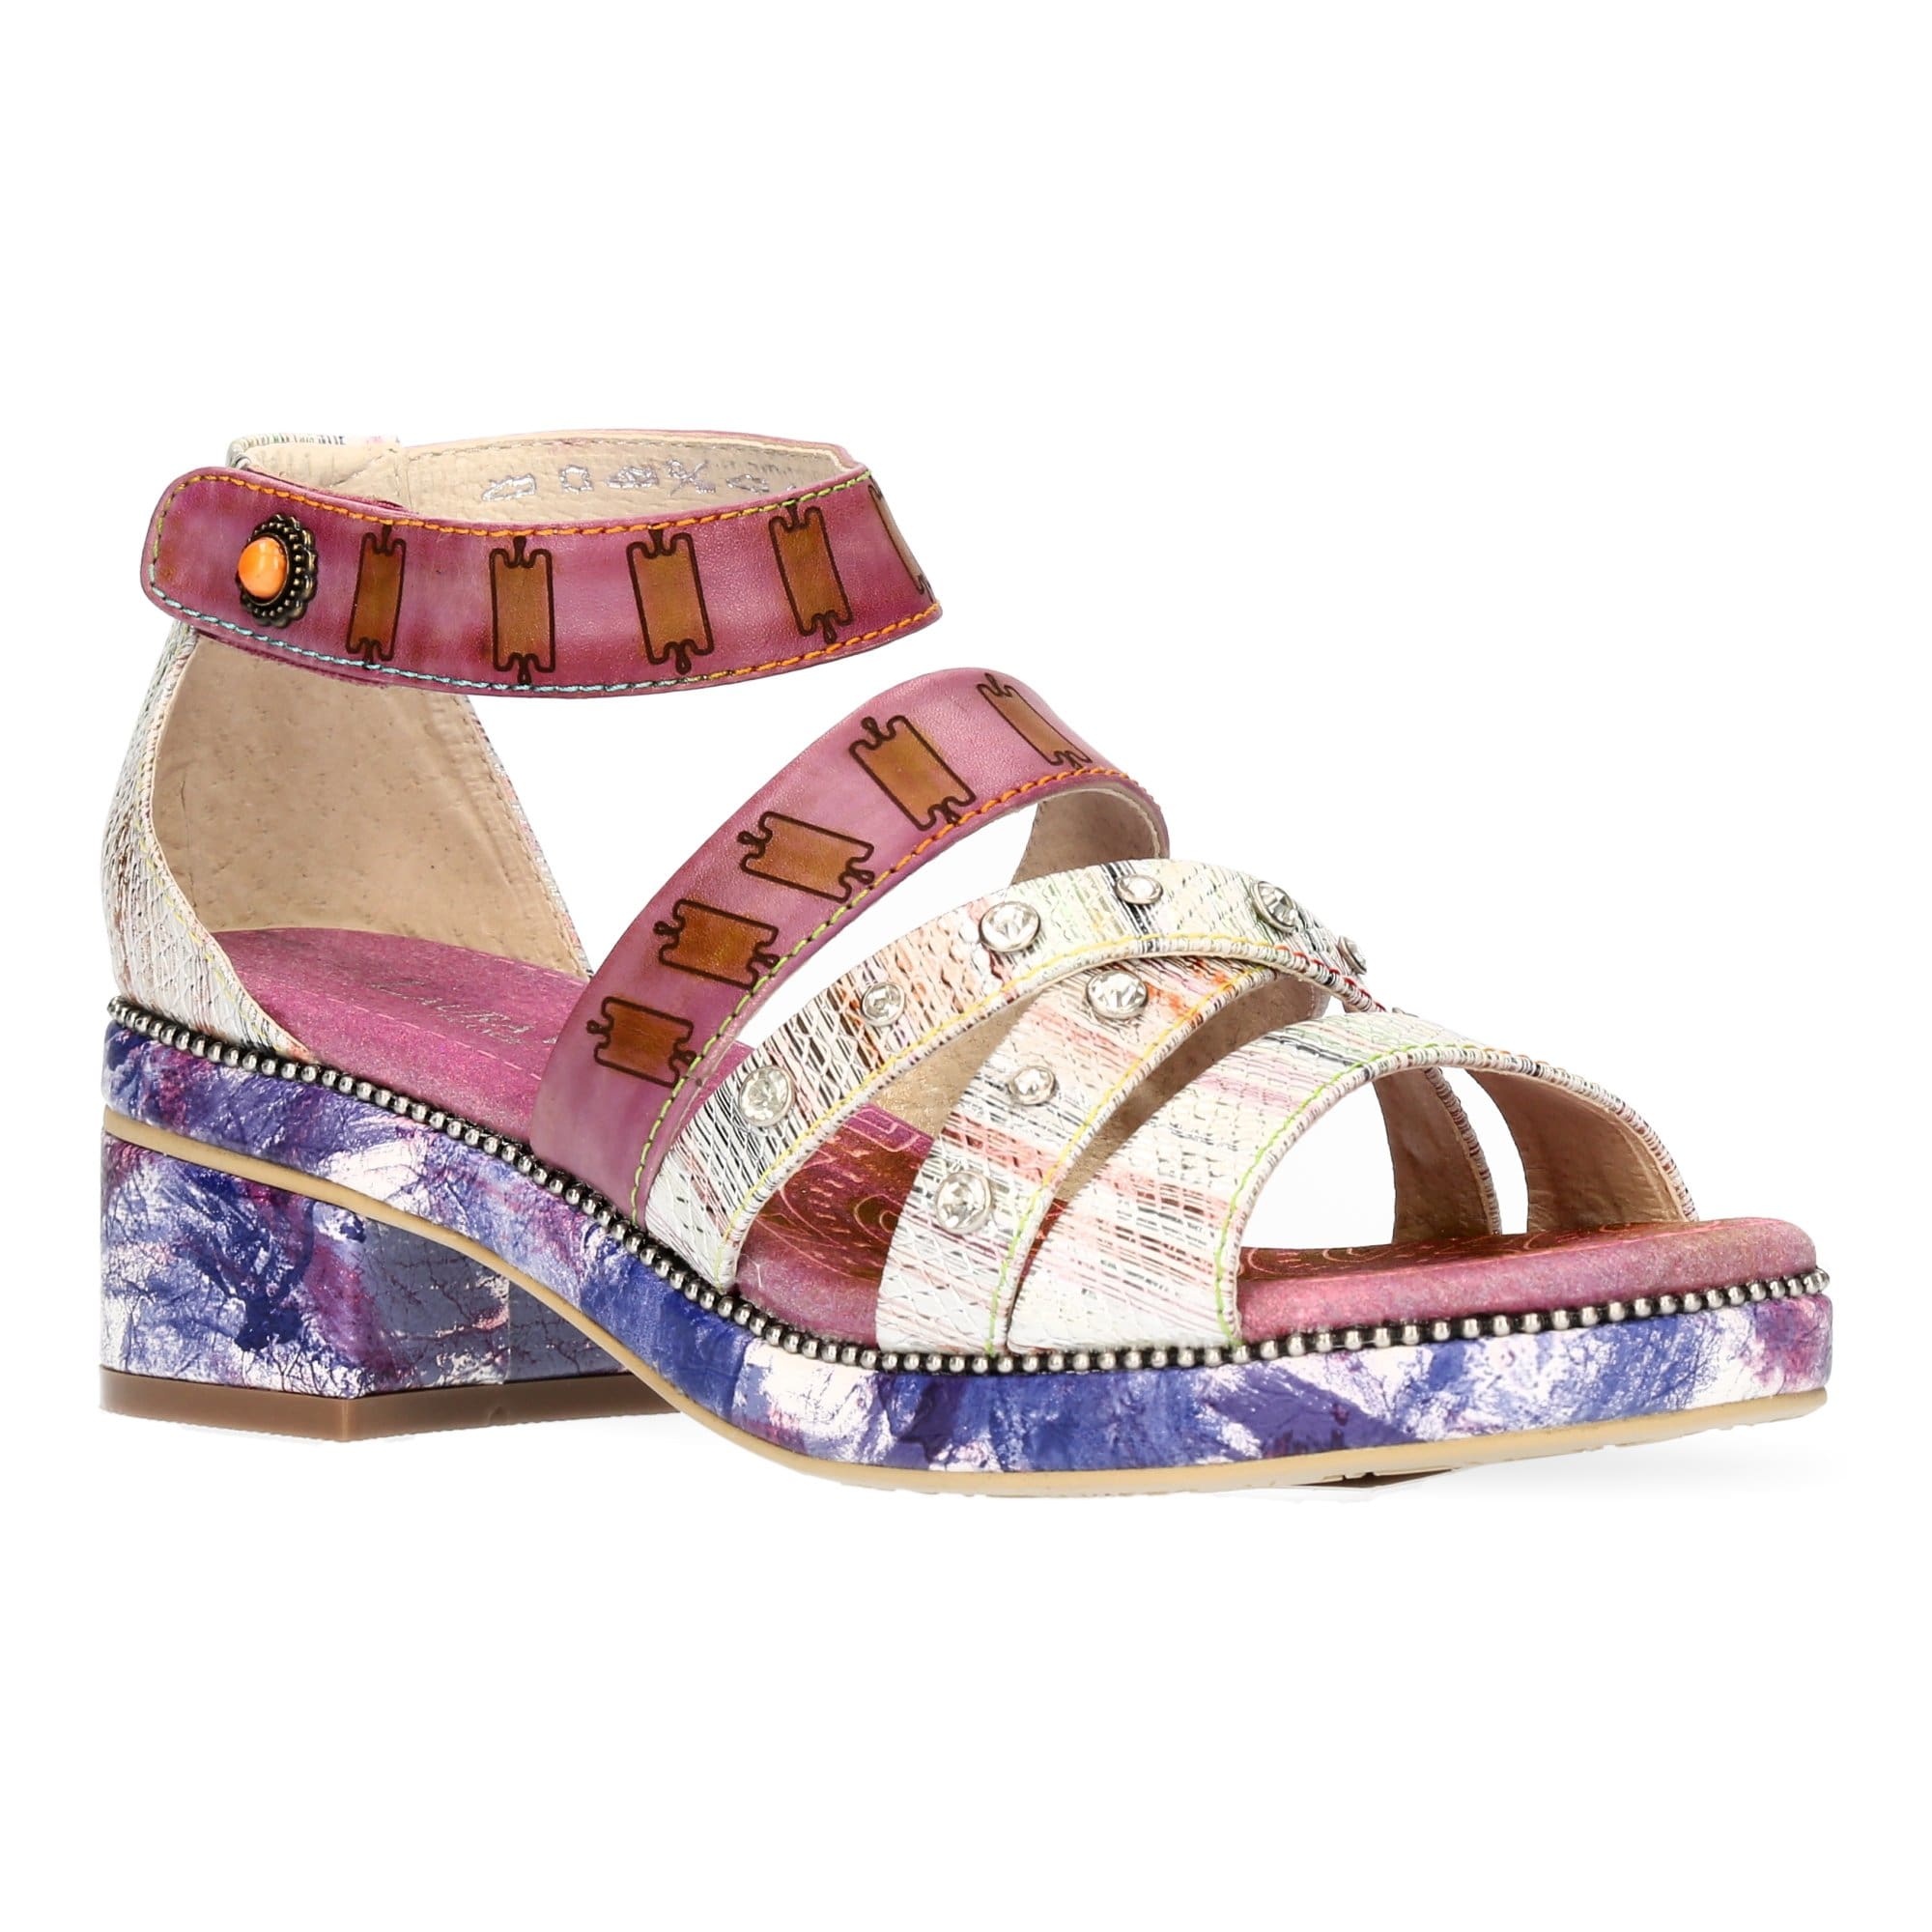 Chaussures JACPINEO 06 - Sandale